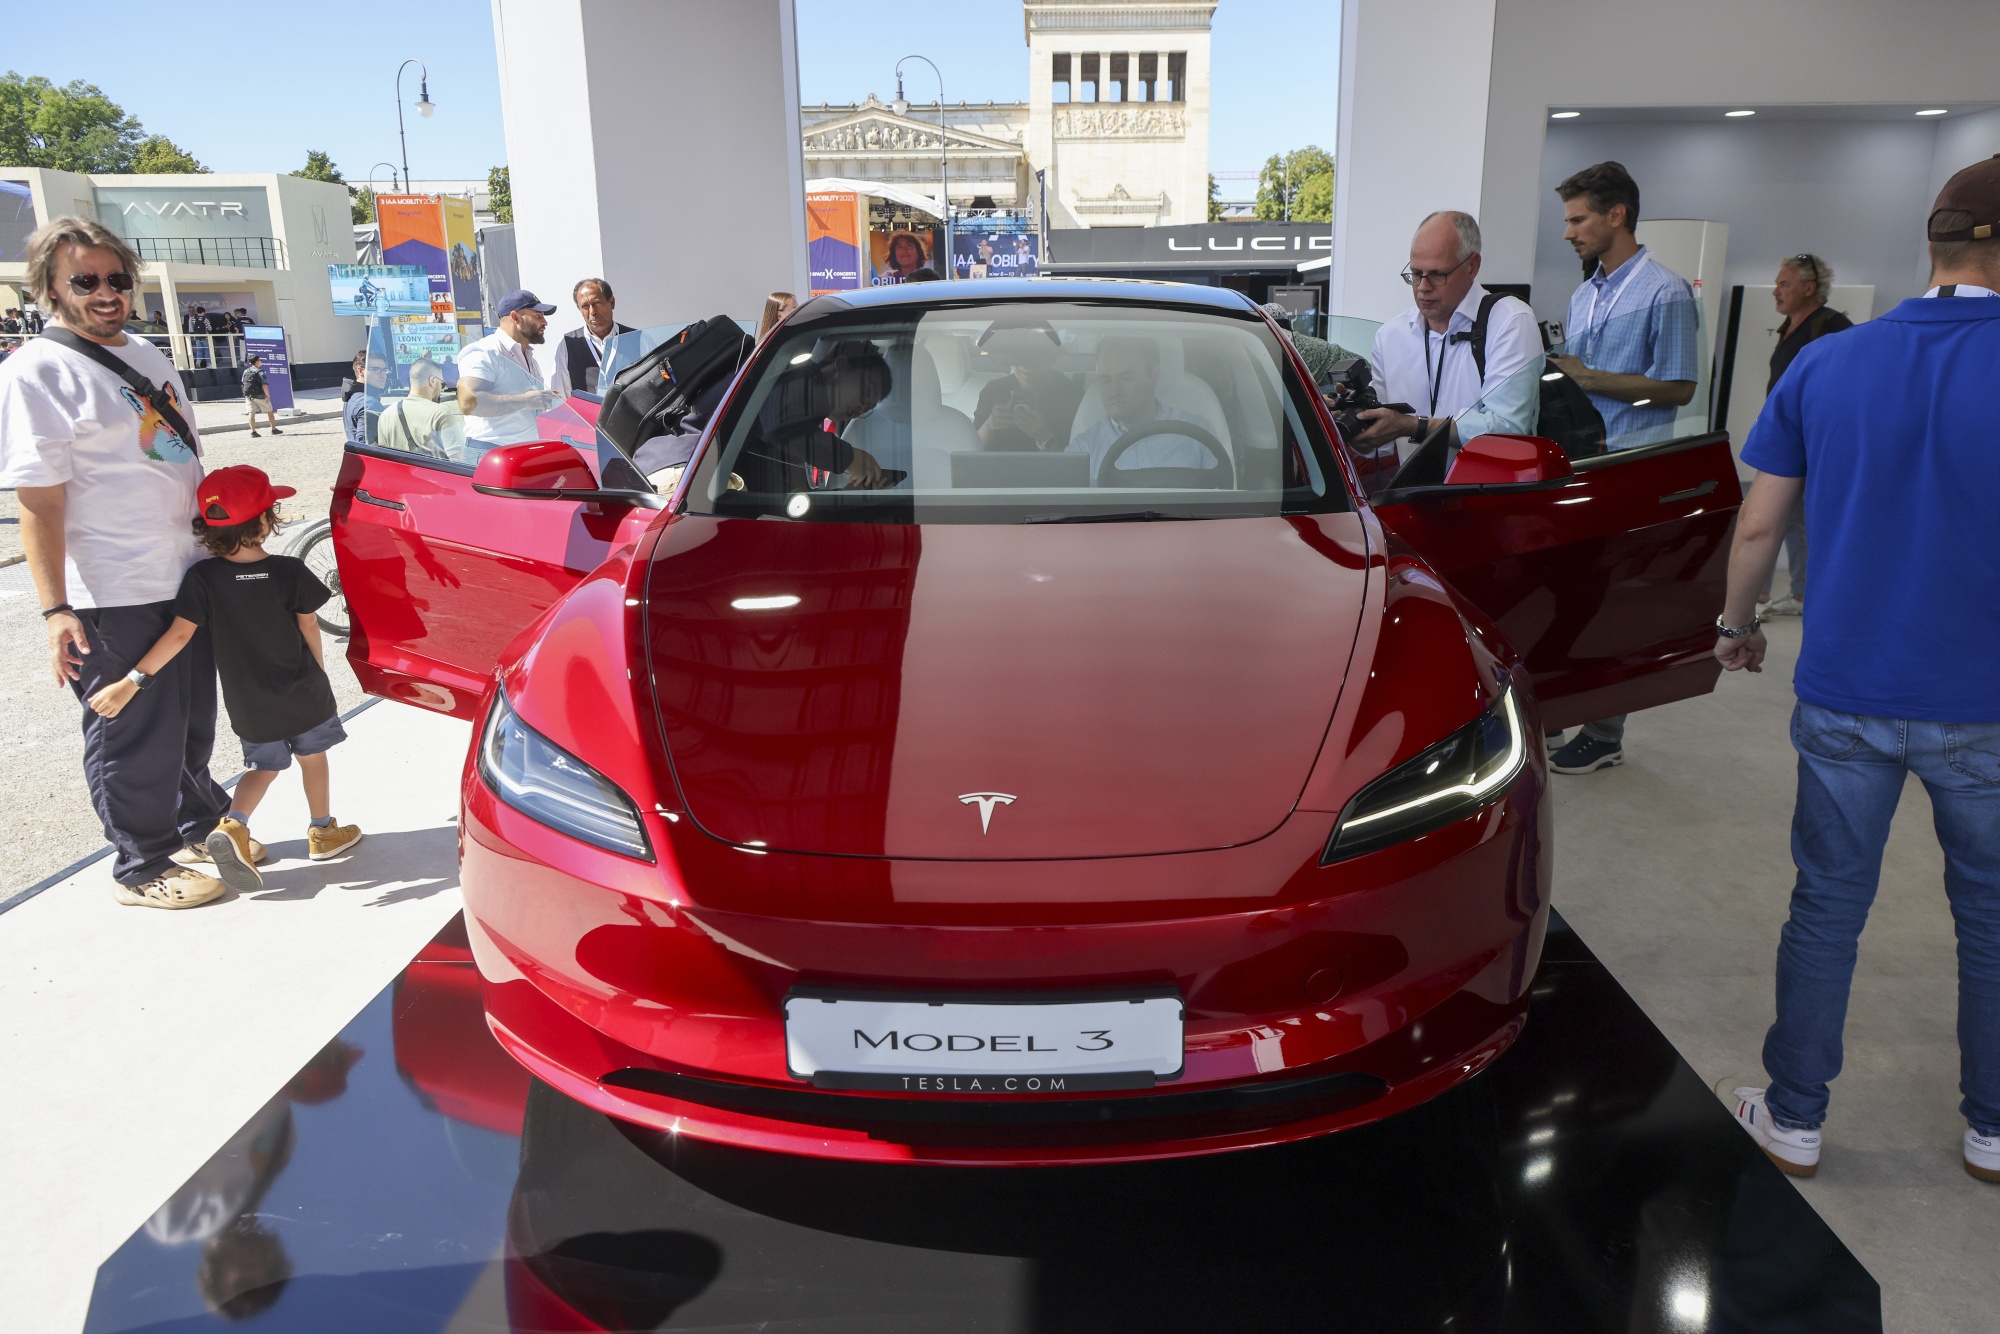 Tesla starts selling refreshed Model 3 in the US